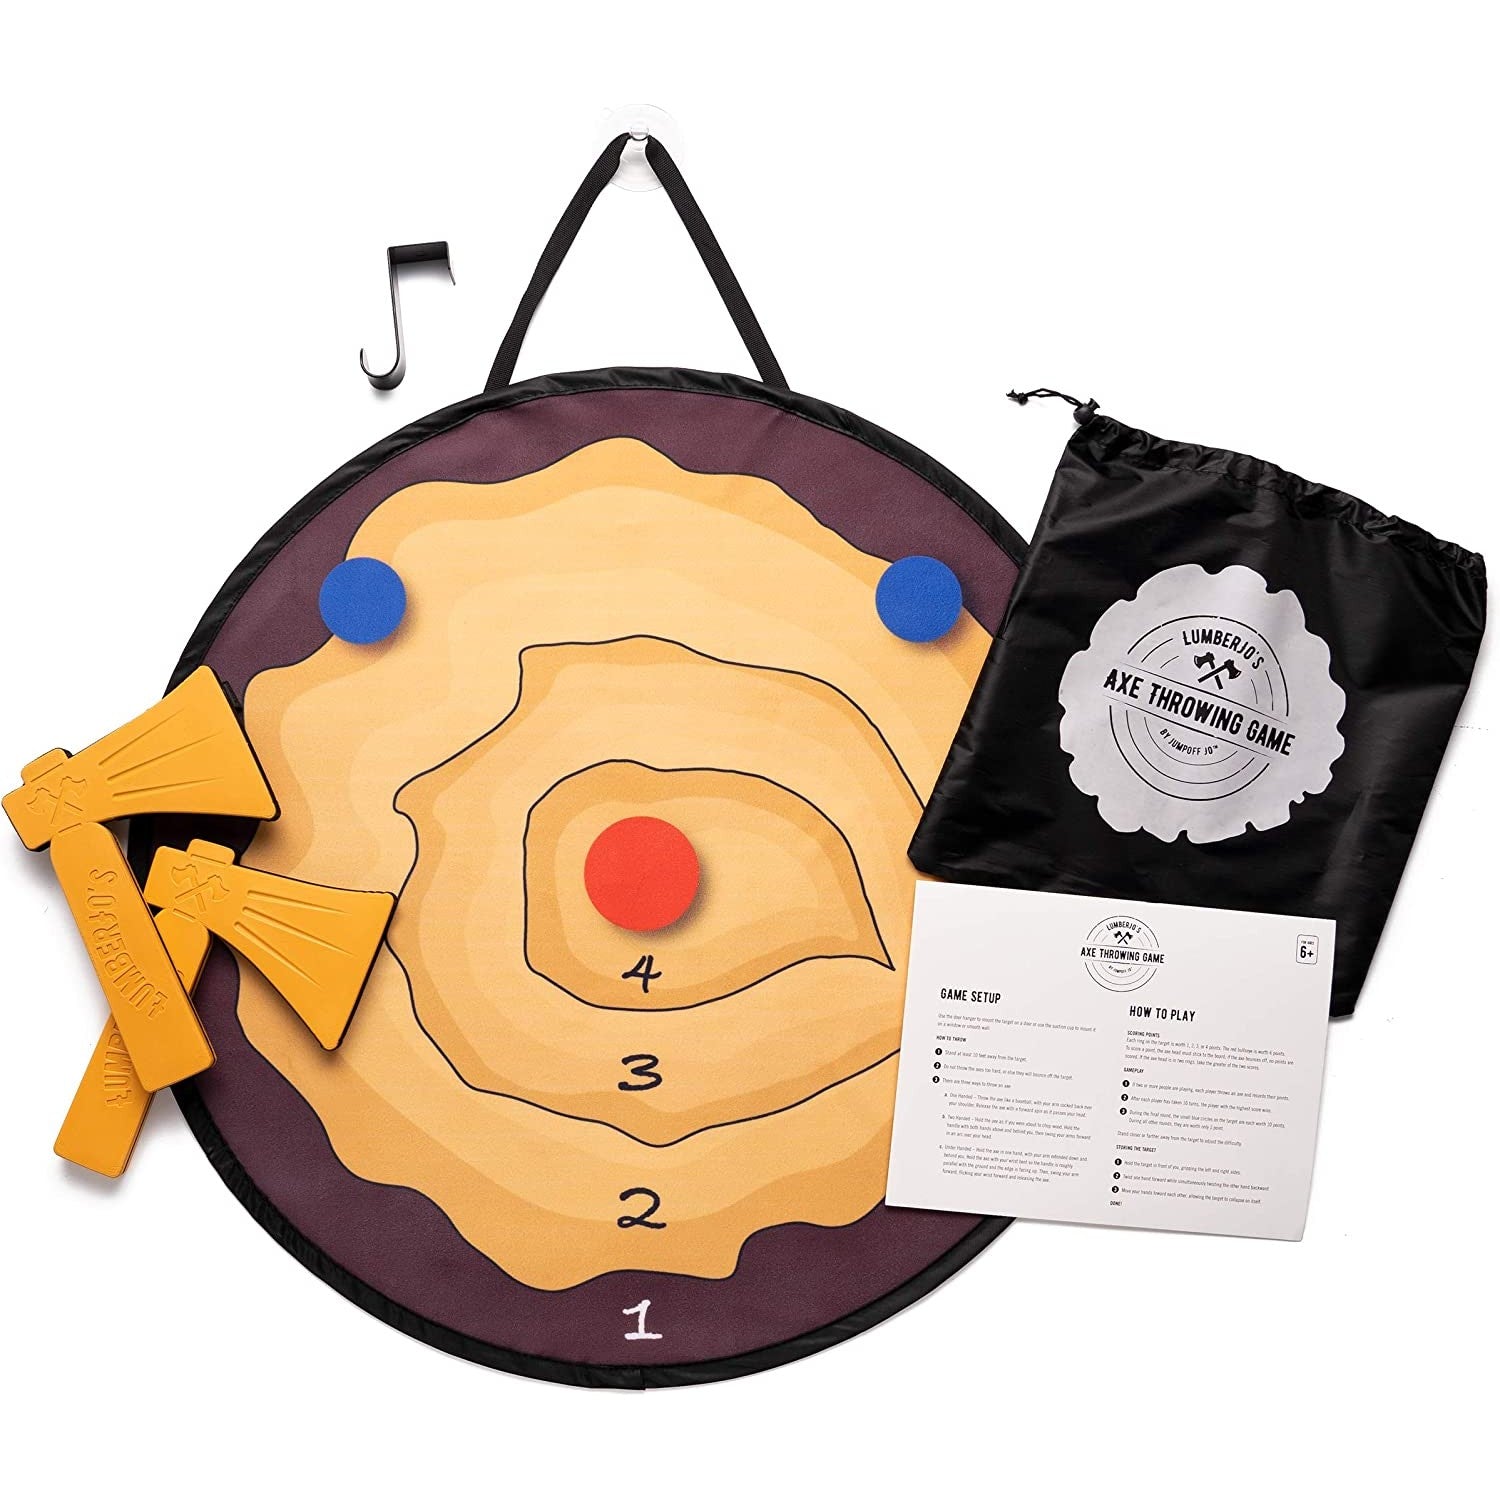 A toy axe throwing game which includes a bullseye board, axes, hook, carry bag and an instruction manual.